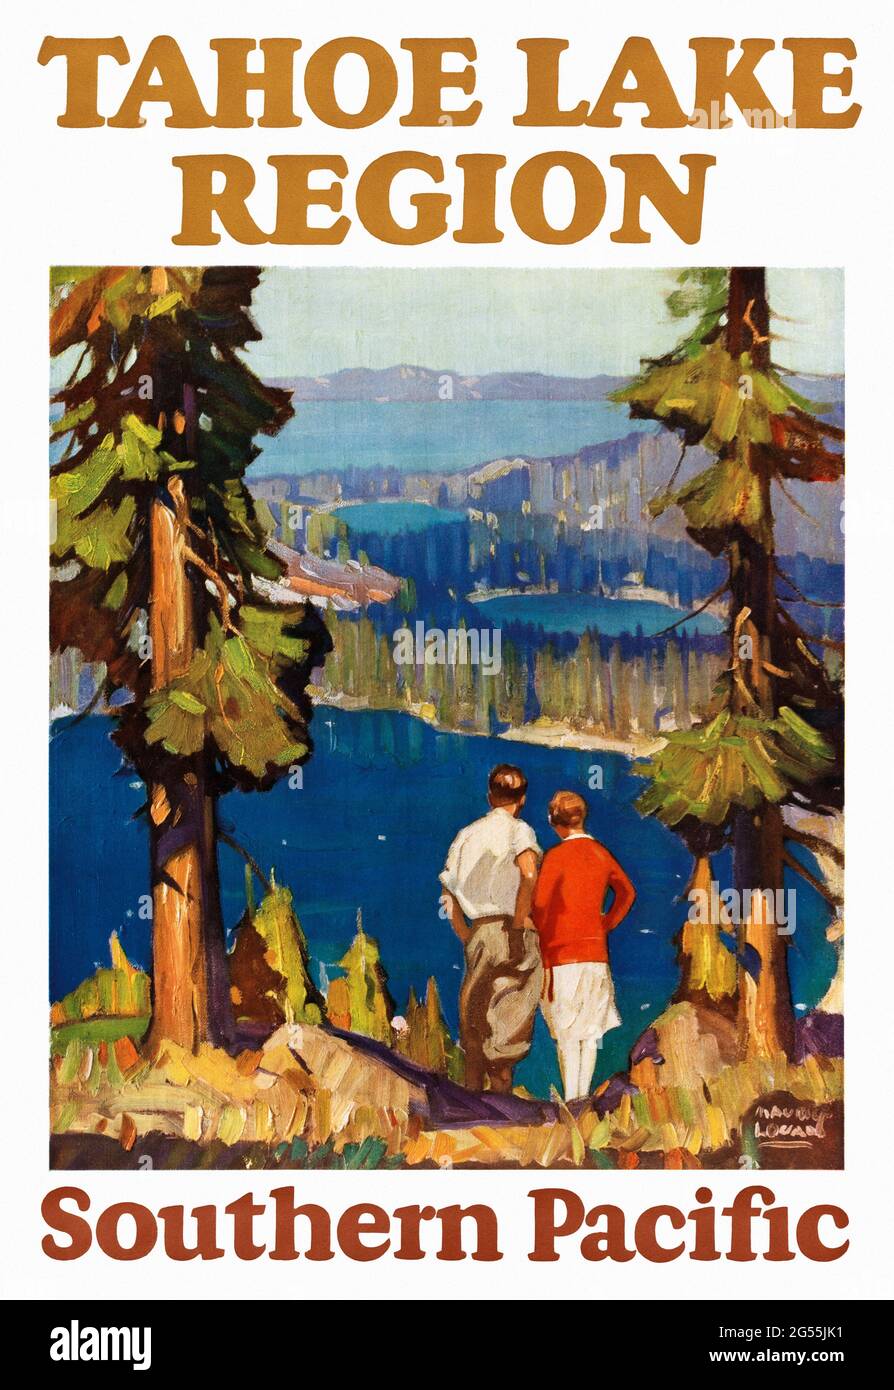 Tahoe Lake Region. Southern Pacific by Maurice Logan (1886-1977). Restored vintage poster published in 1927 in the USA. Stock Photo